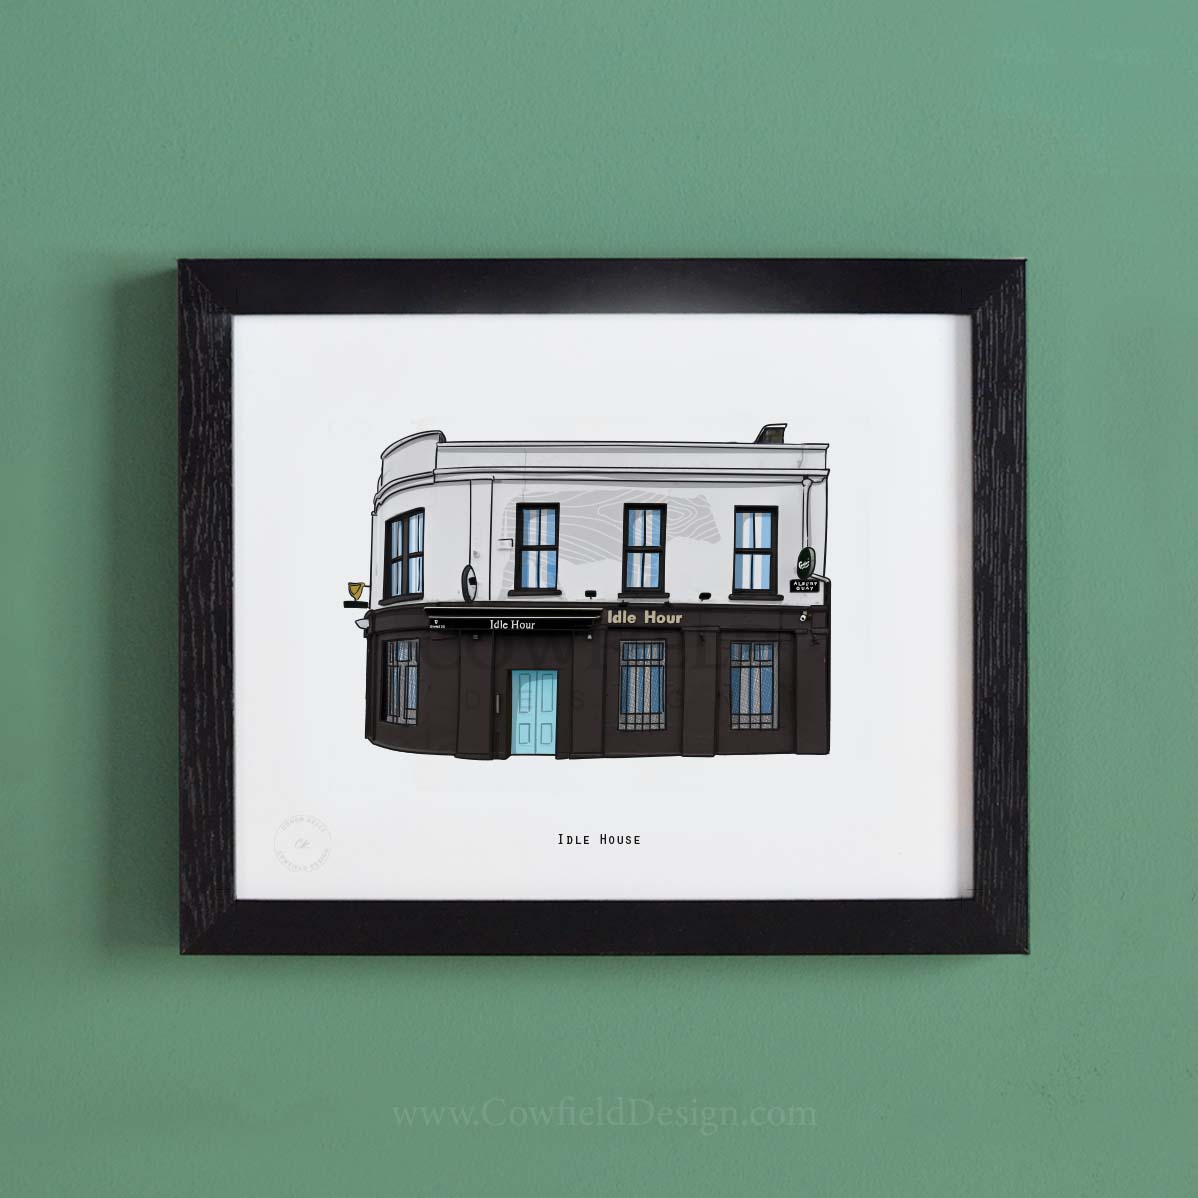 Idle House Illustrated Pubs of Cork